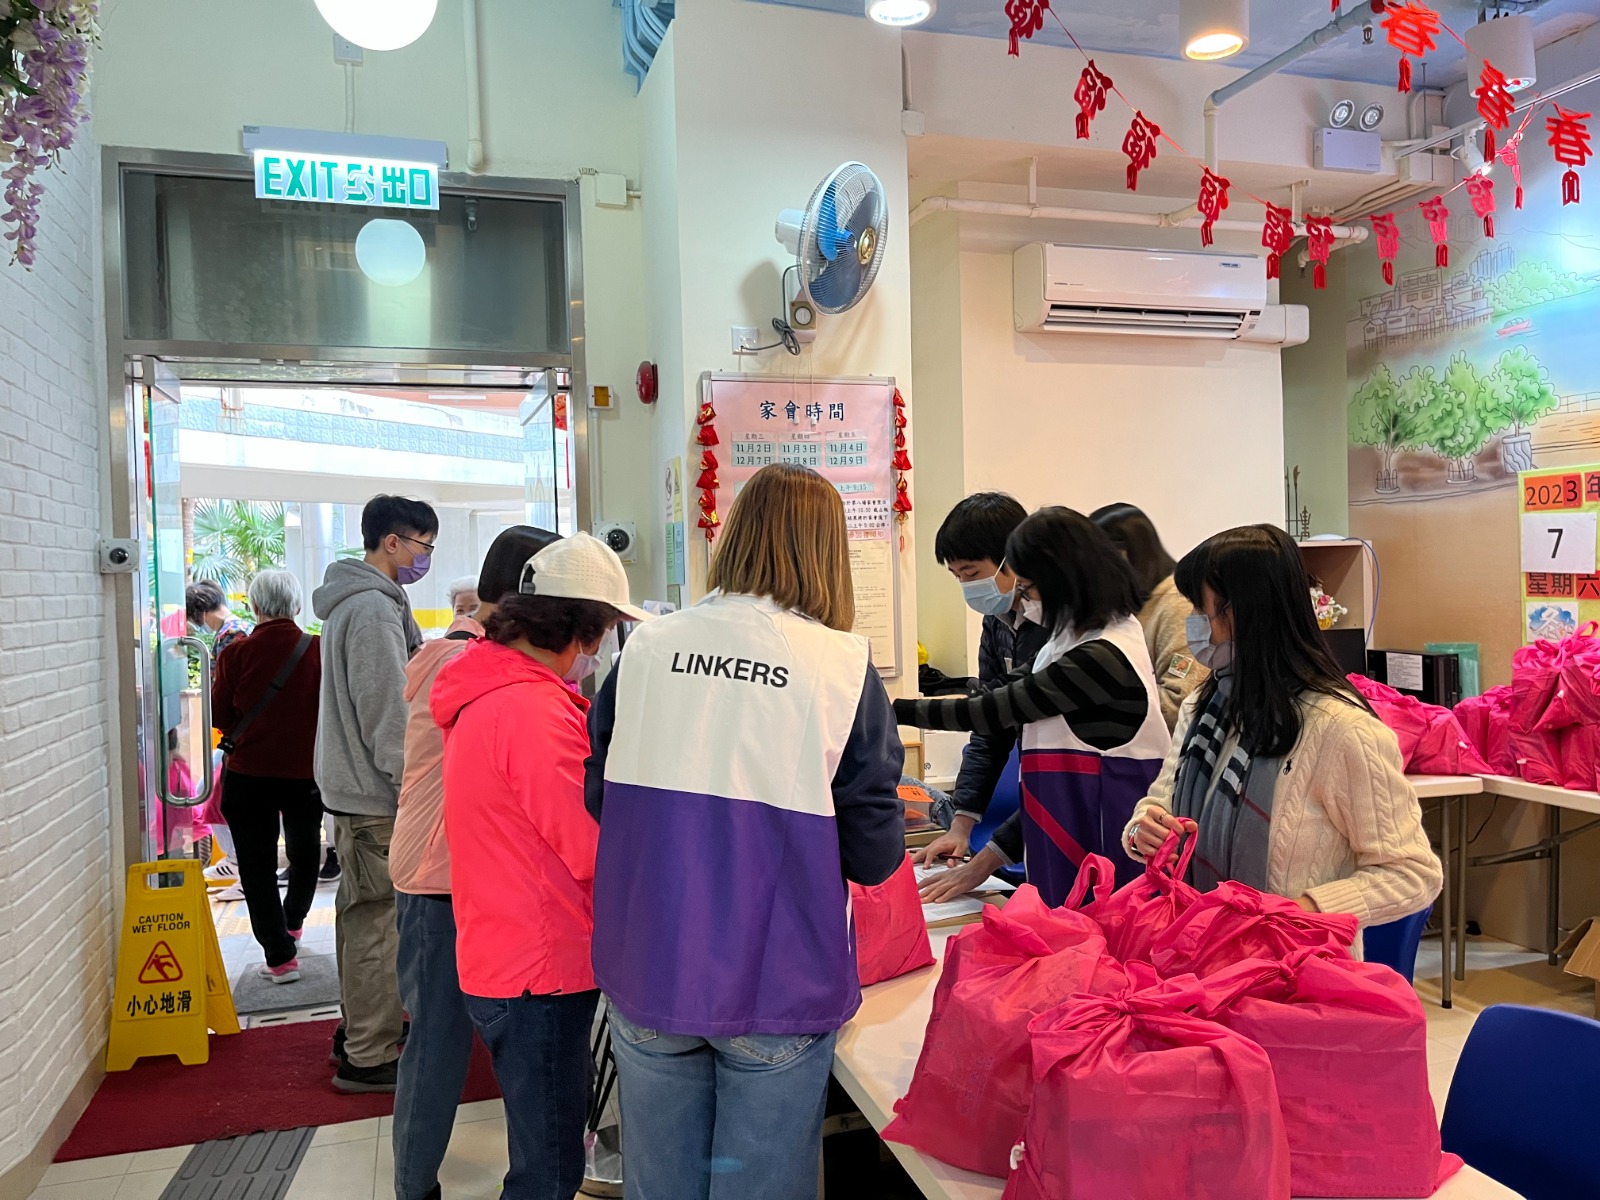 In January, the participants and some Link volunteers visited Lam Tin Elderly Centre at Ping Tin Estate to distribute Chinese New Year Fortune Bags. 